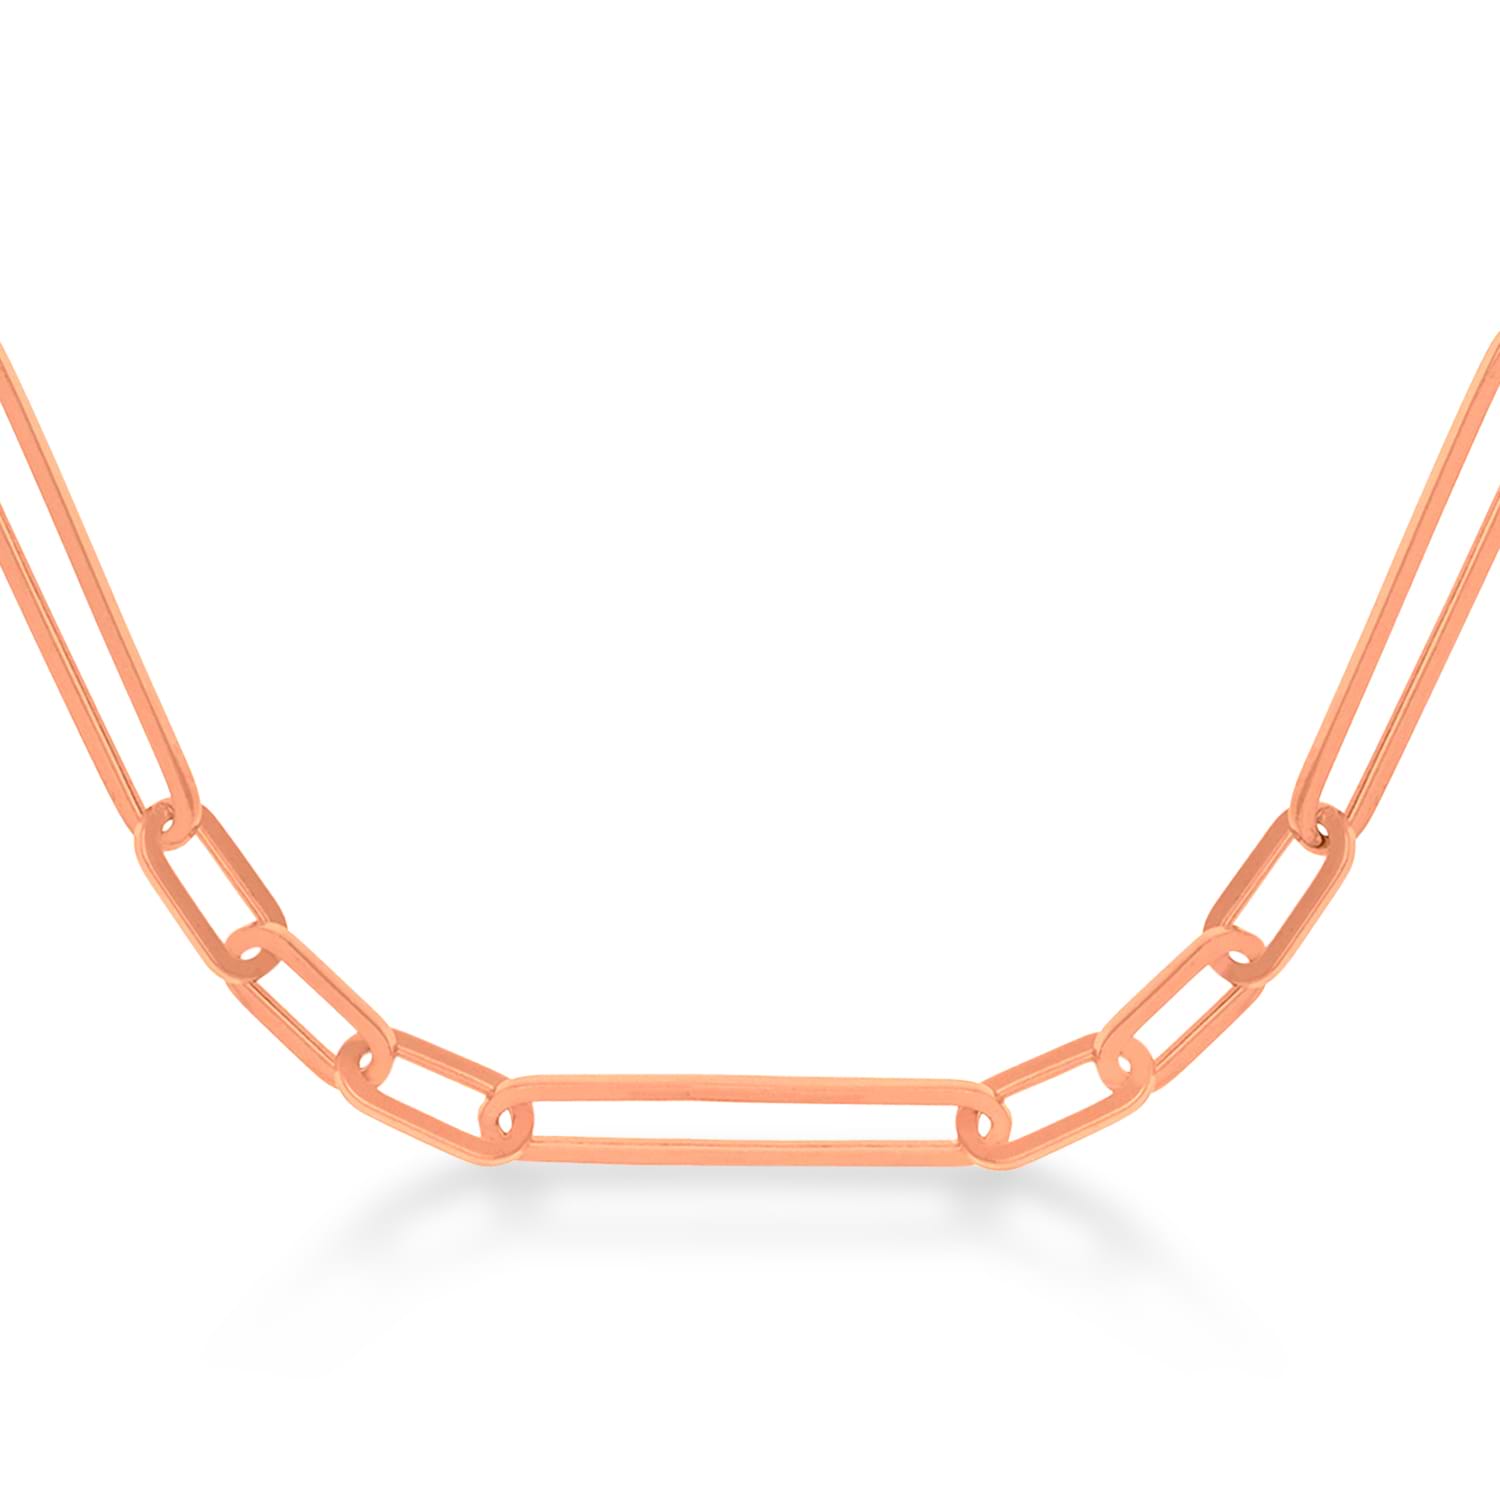 Hollow Paperclip Link Chain Necklace 14k Rose Gold